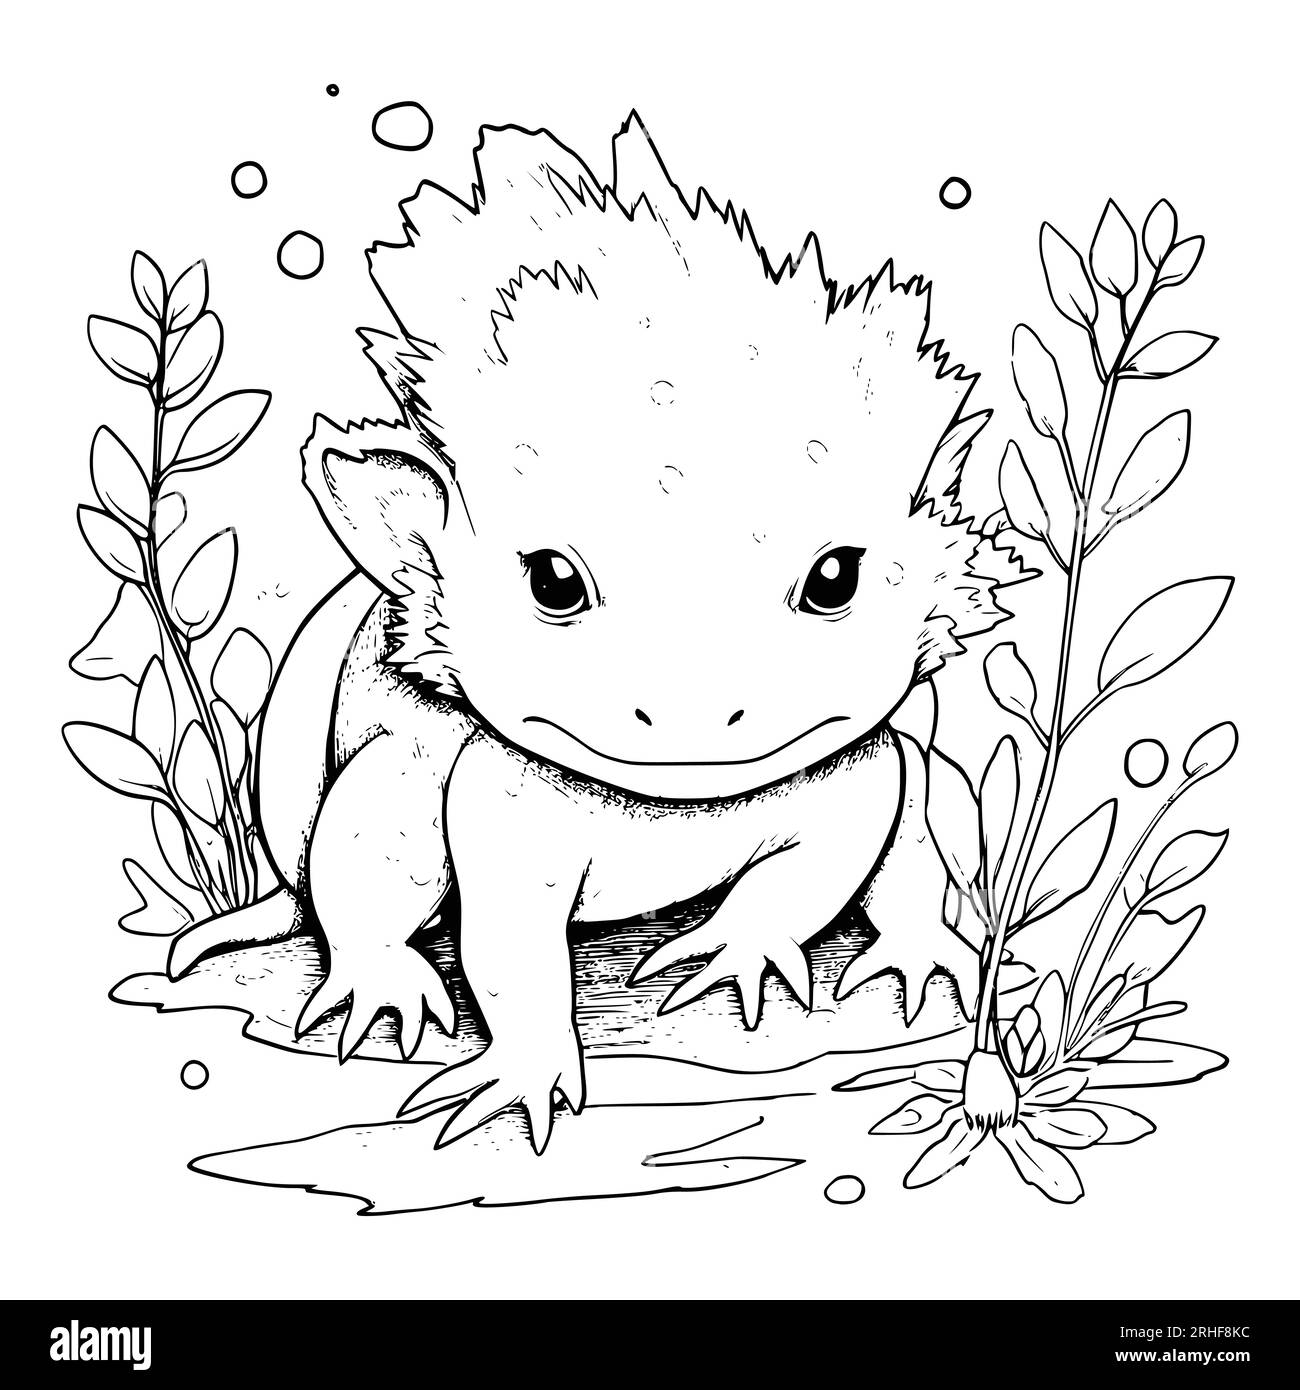 Axolotl Coloring Page Drawing For Kids Stock Vector